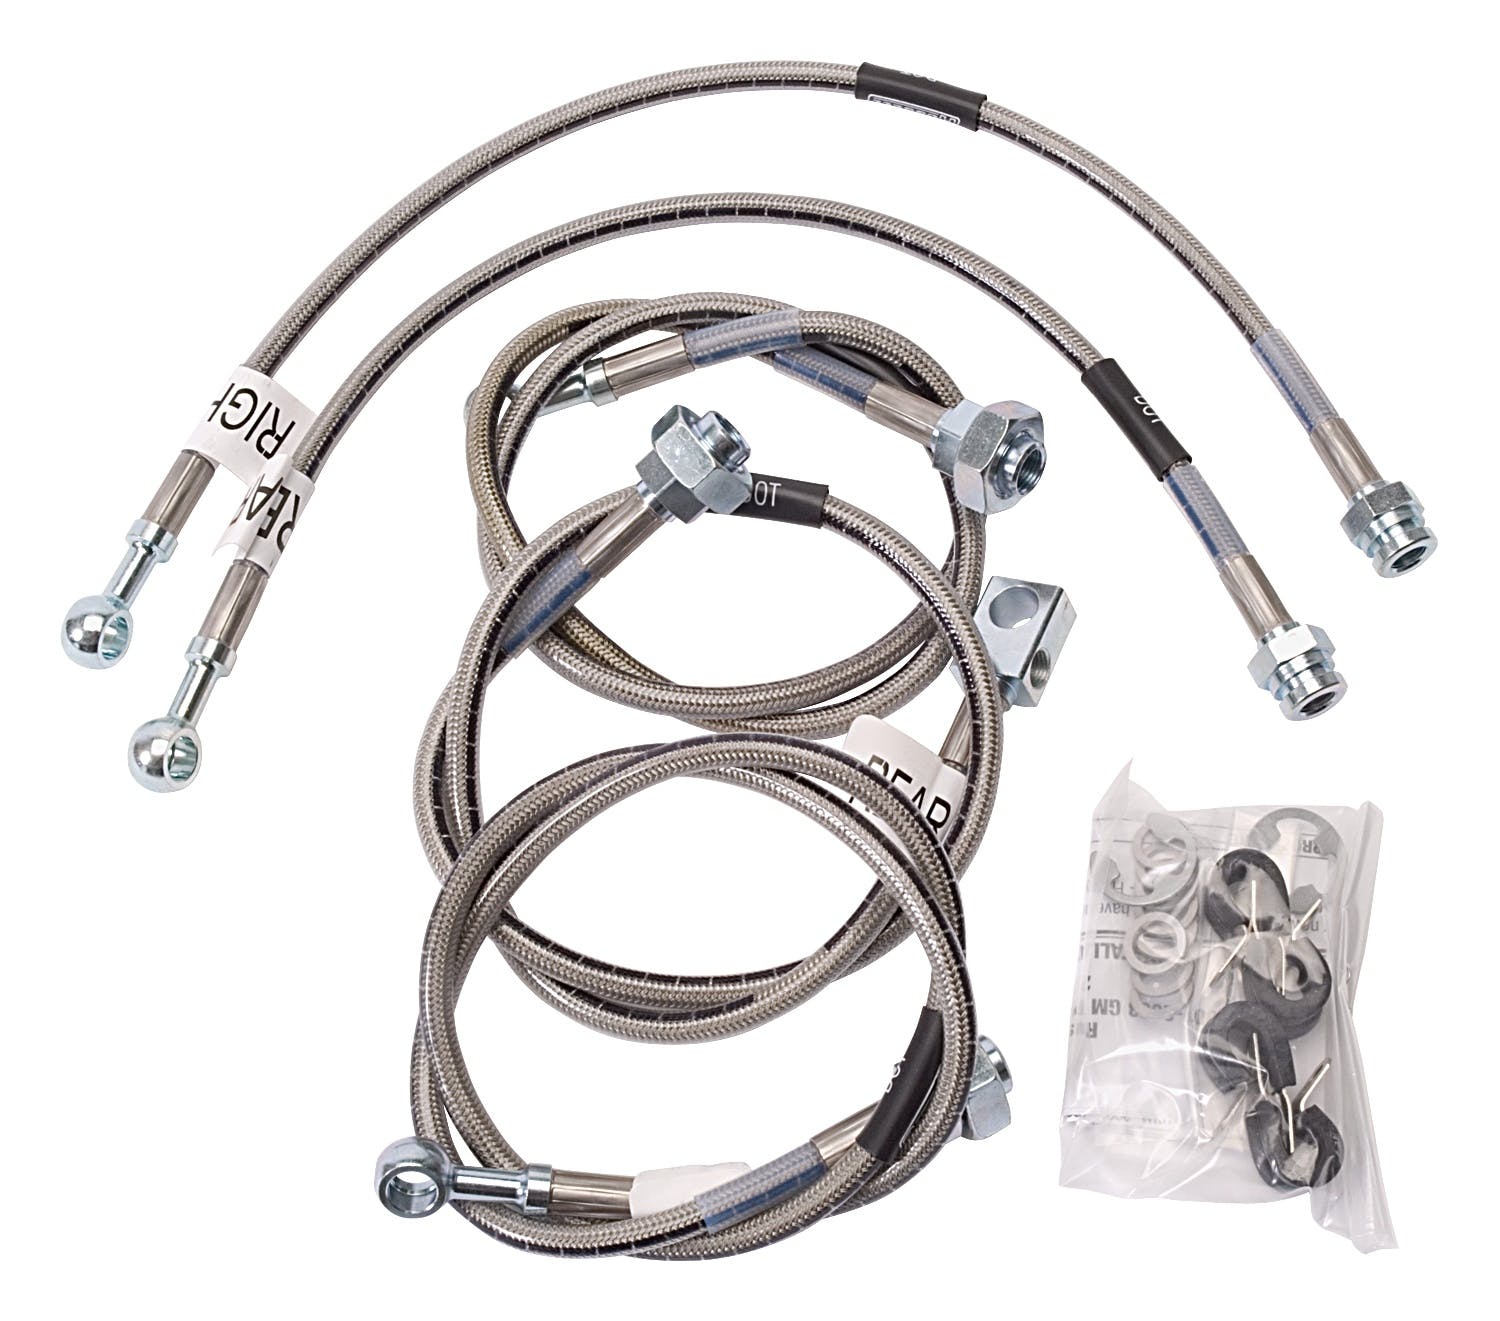 Russell 695770 Brake Line Kit Chevy and GM HD with 4-6 inch lift